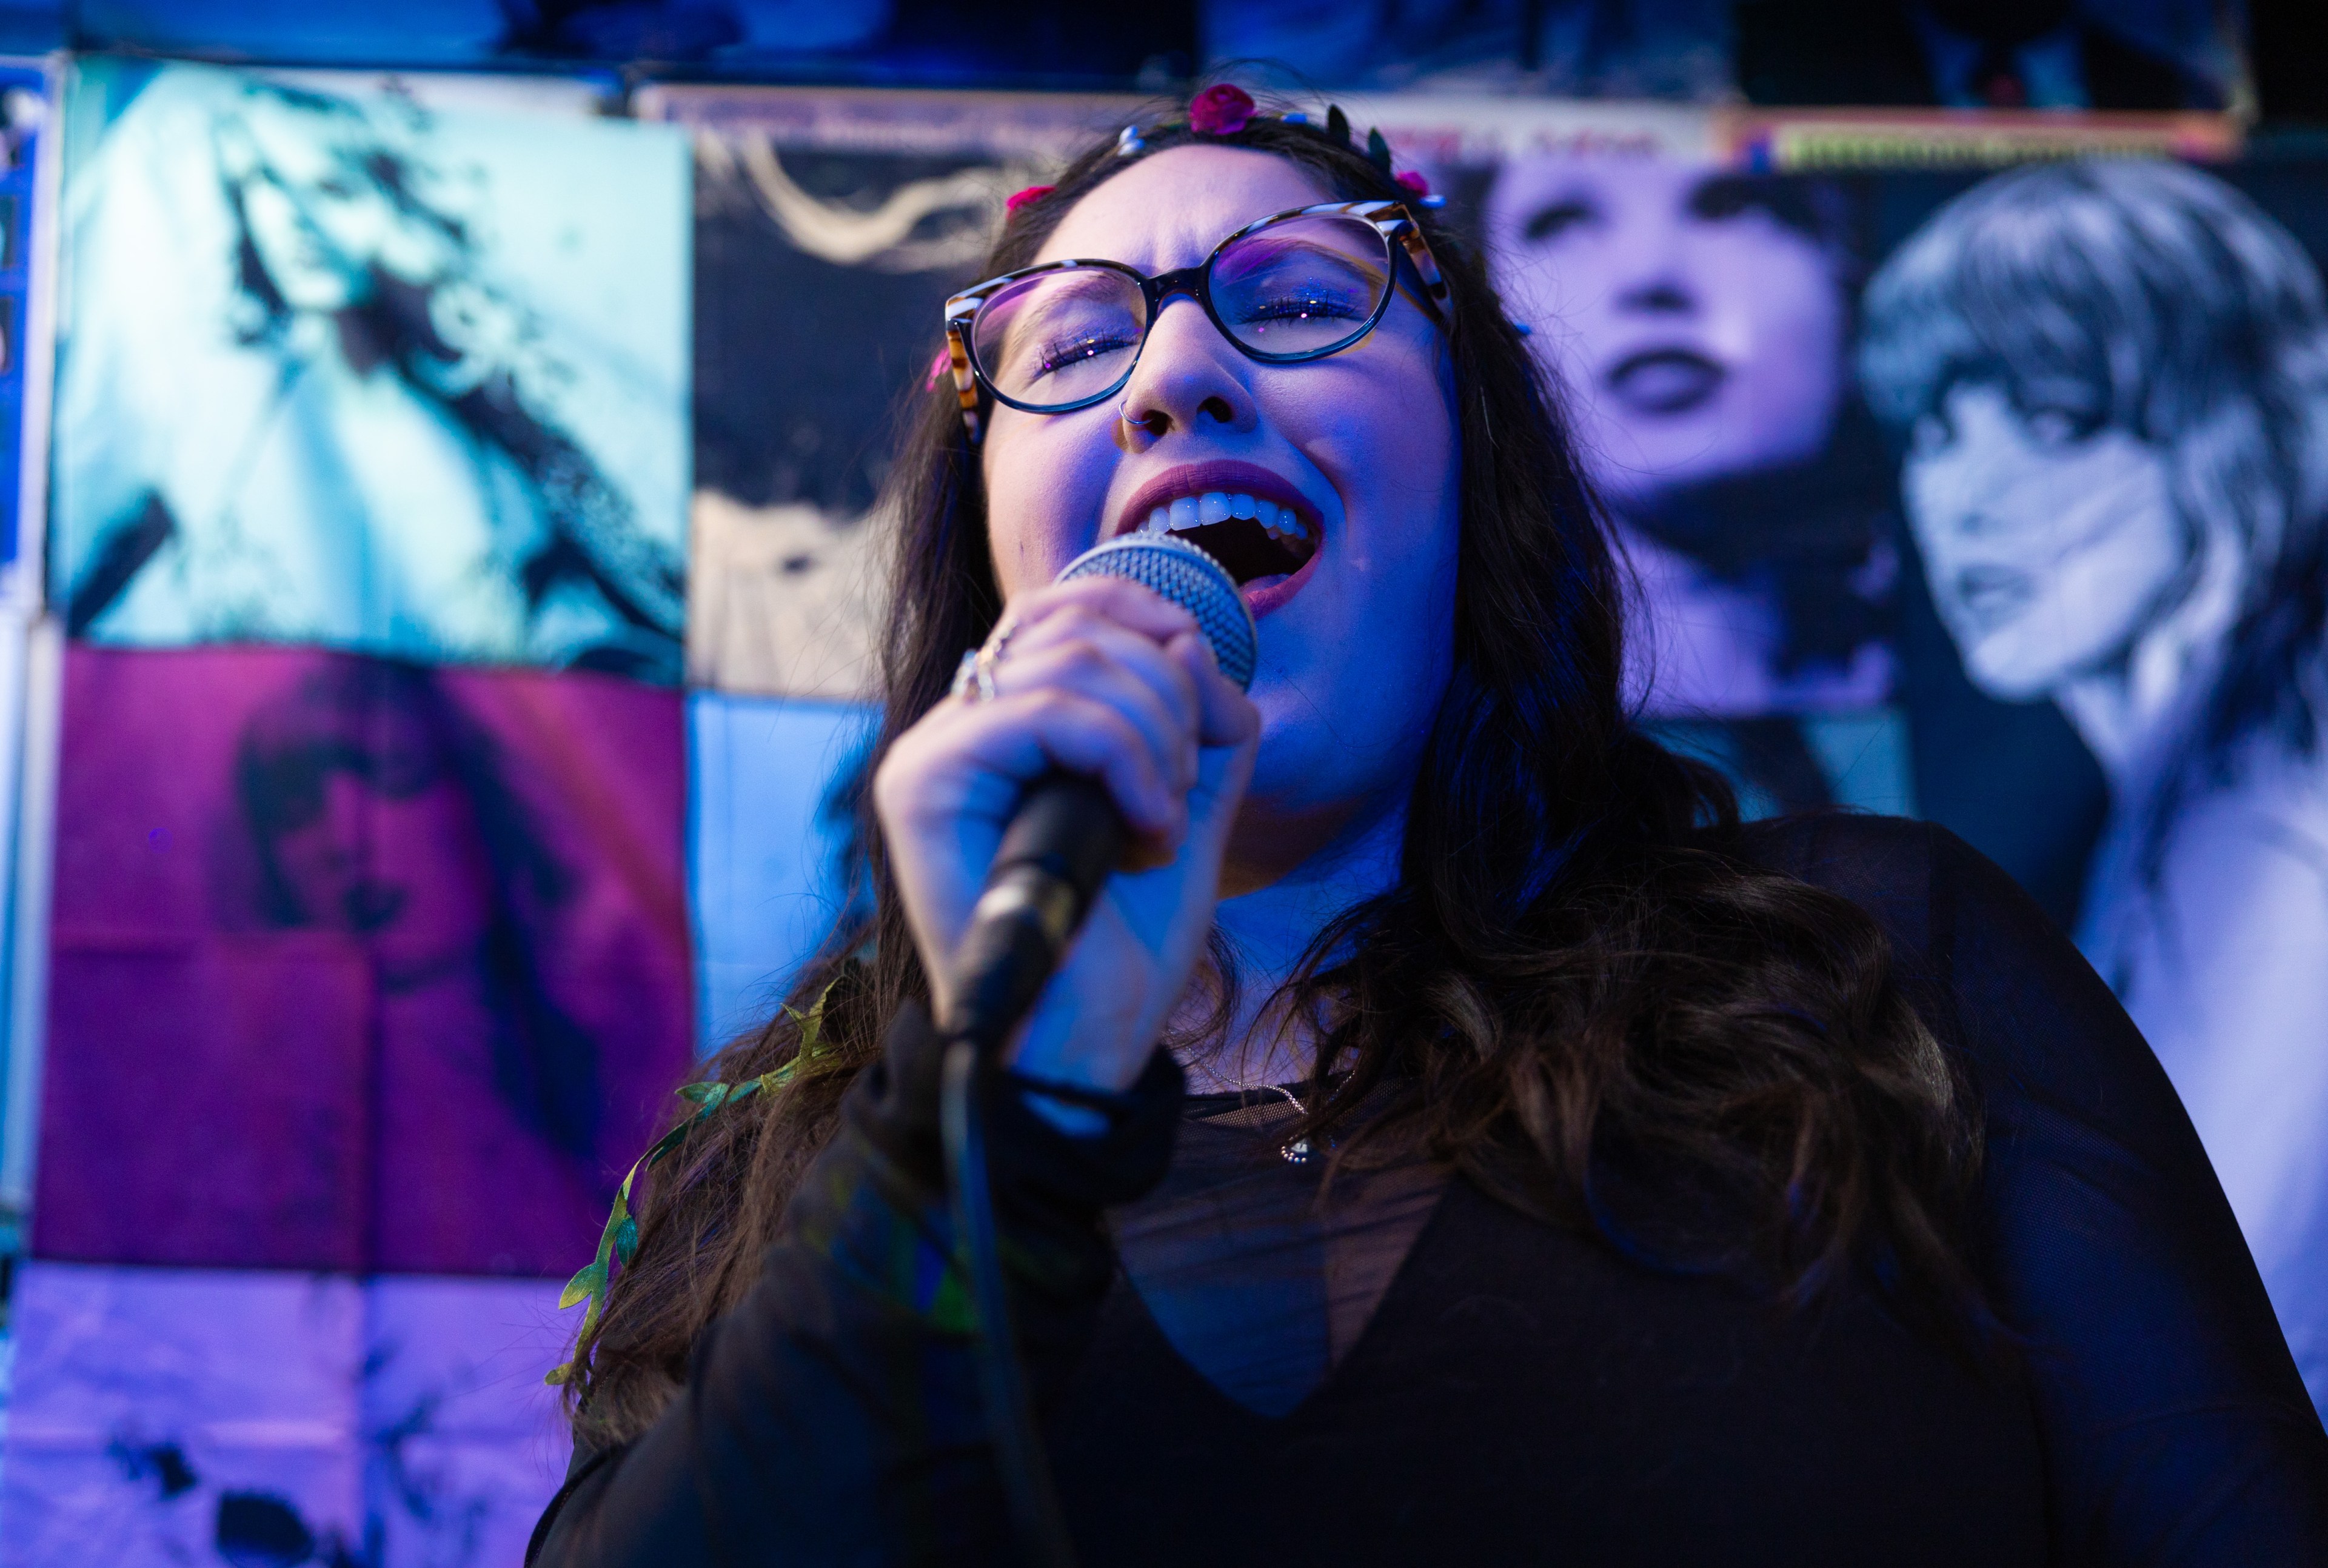 A woman sings into a microphone with vibrant wall art of female faces behind her.